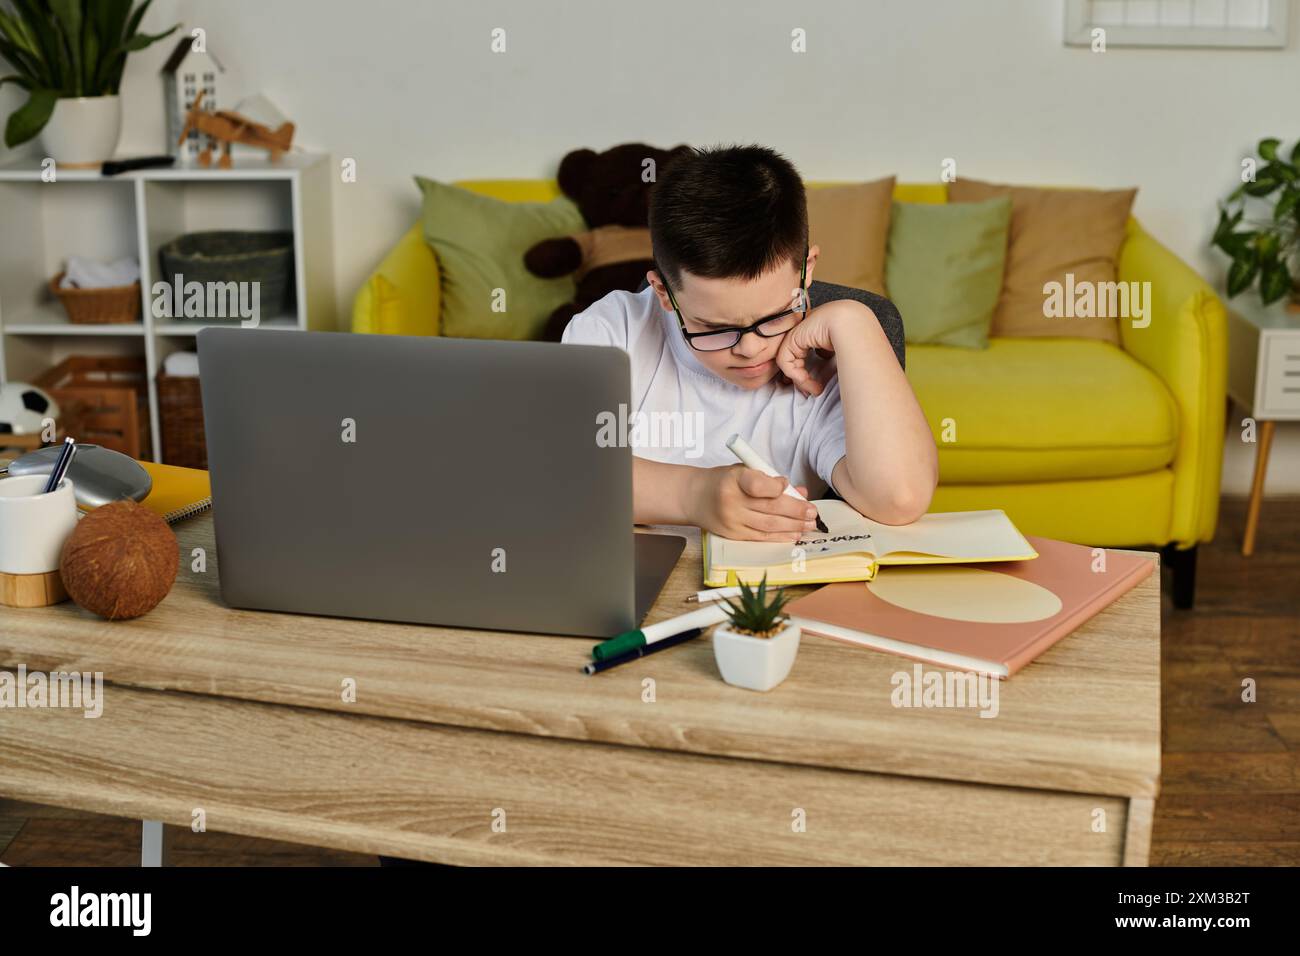 A young boy with Down syndrome sits at a table studying. Stock Photo